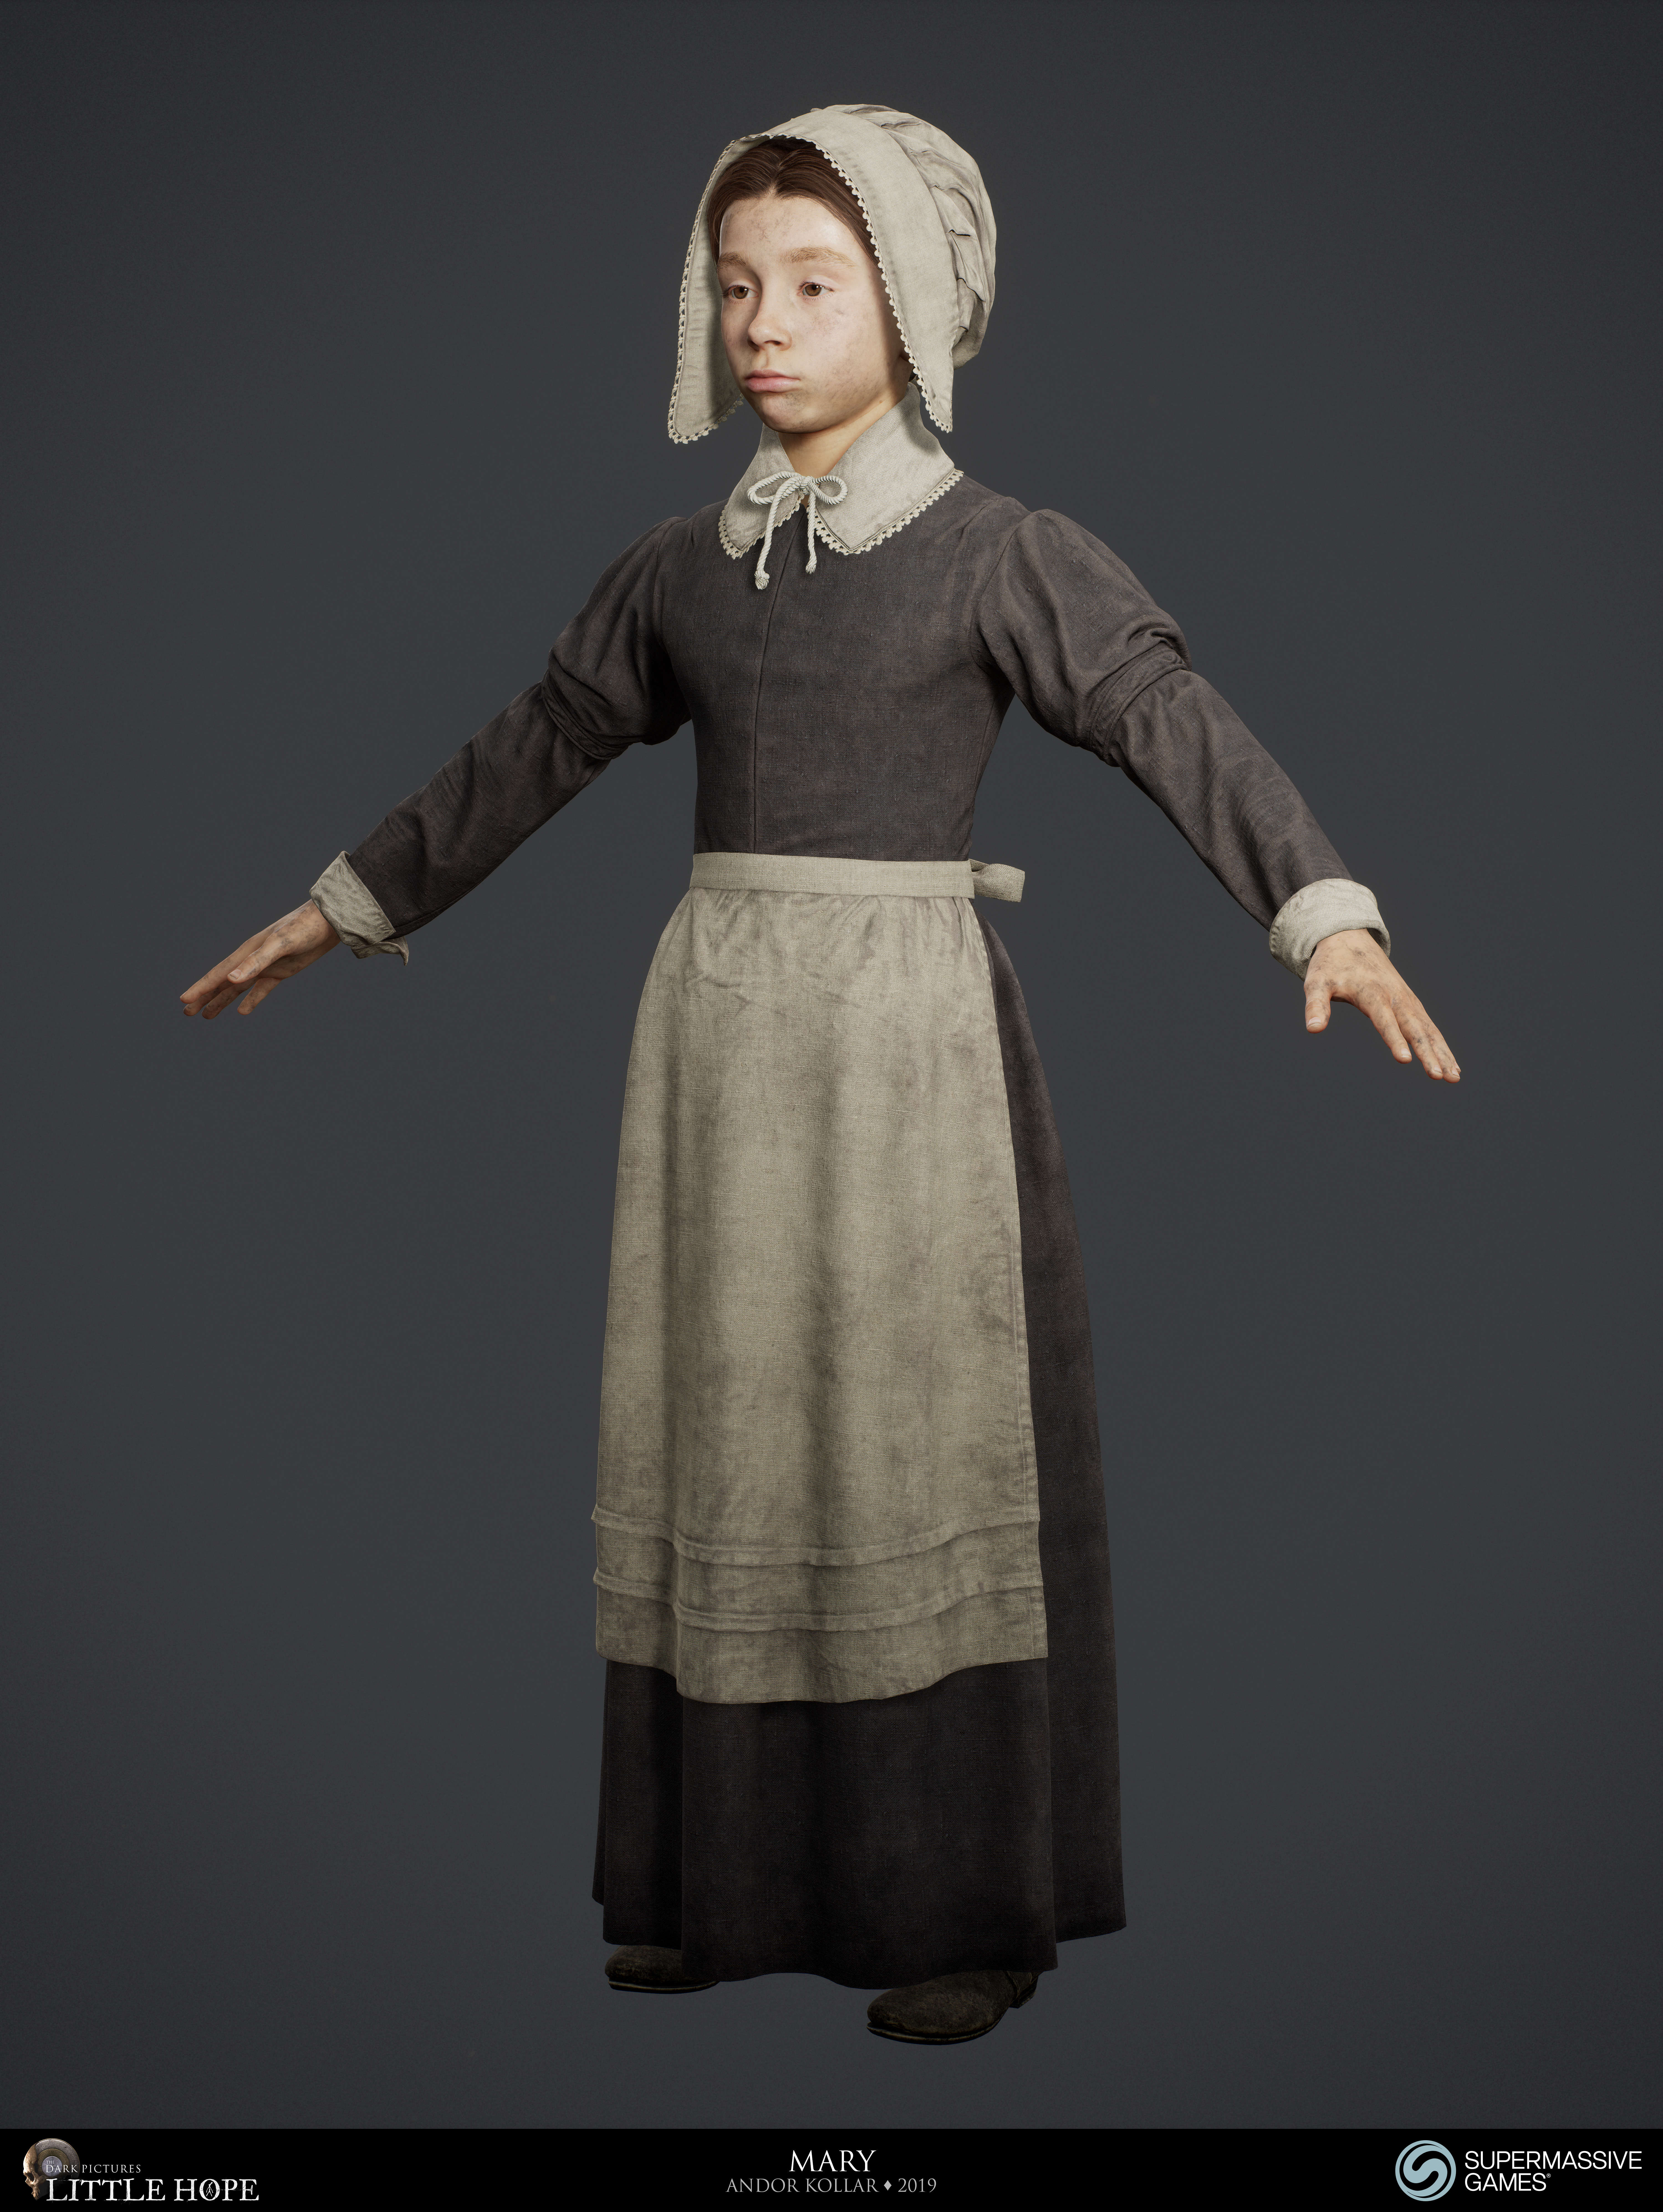 Little Hope, 3d game character, Mary, little girl with 17th century dress, bonnet, skirt, Unreal Engine, Andor Kollar